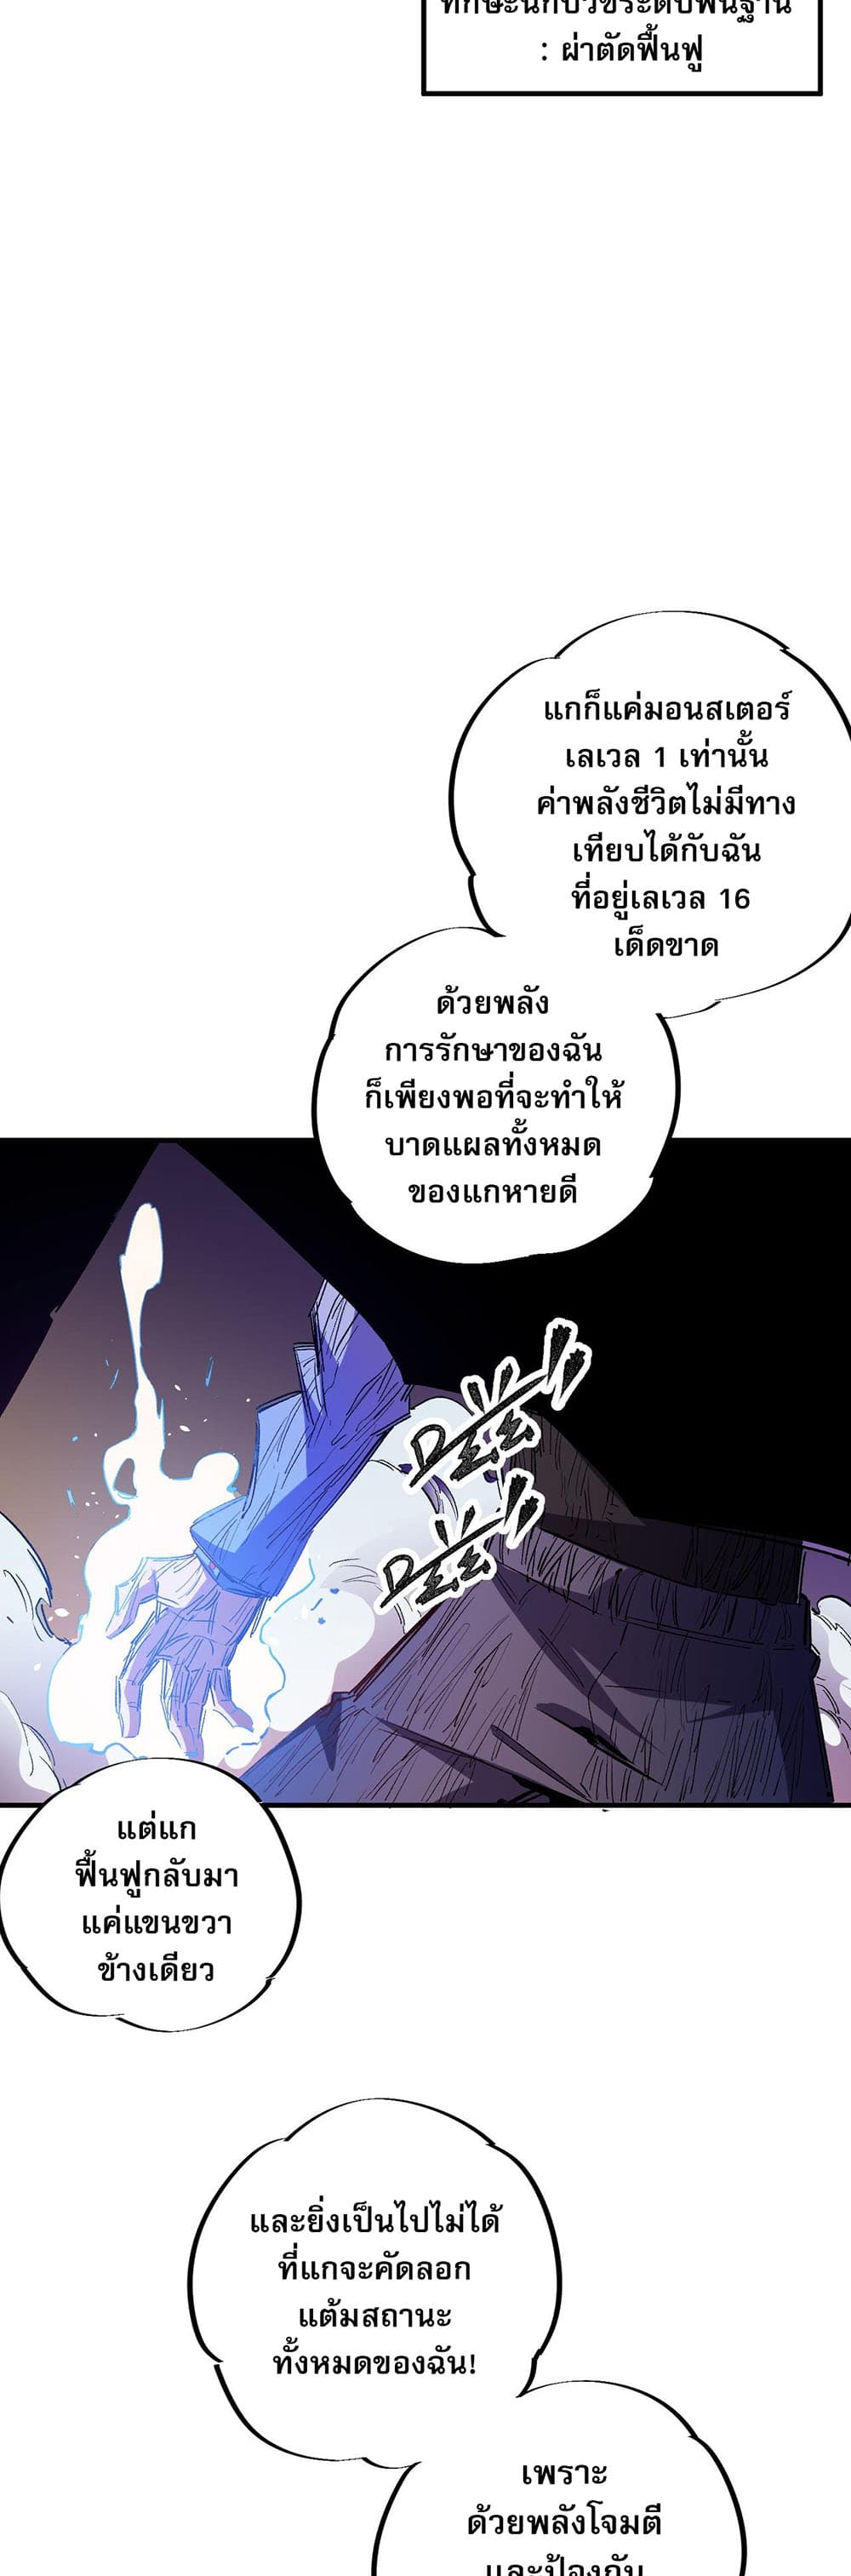 Job Changing for the Entire Population: The Jobless Me Will Terminate the Gods ฉันคือผู้เล่นไร้อาชีพที่สังหารเหล่าเทพ 16-16